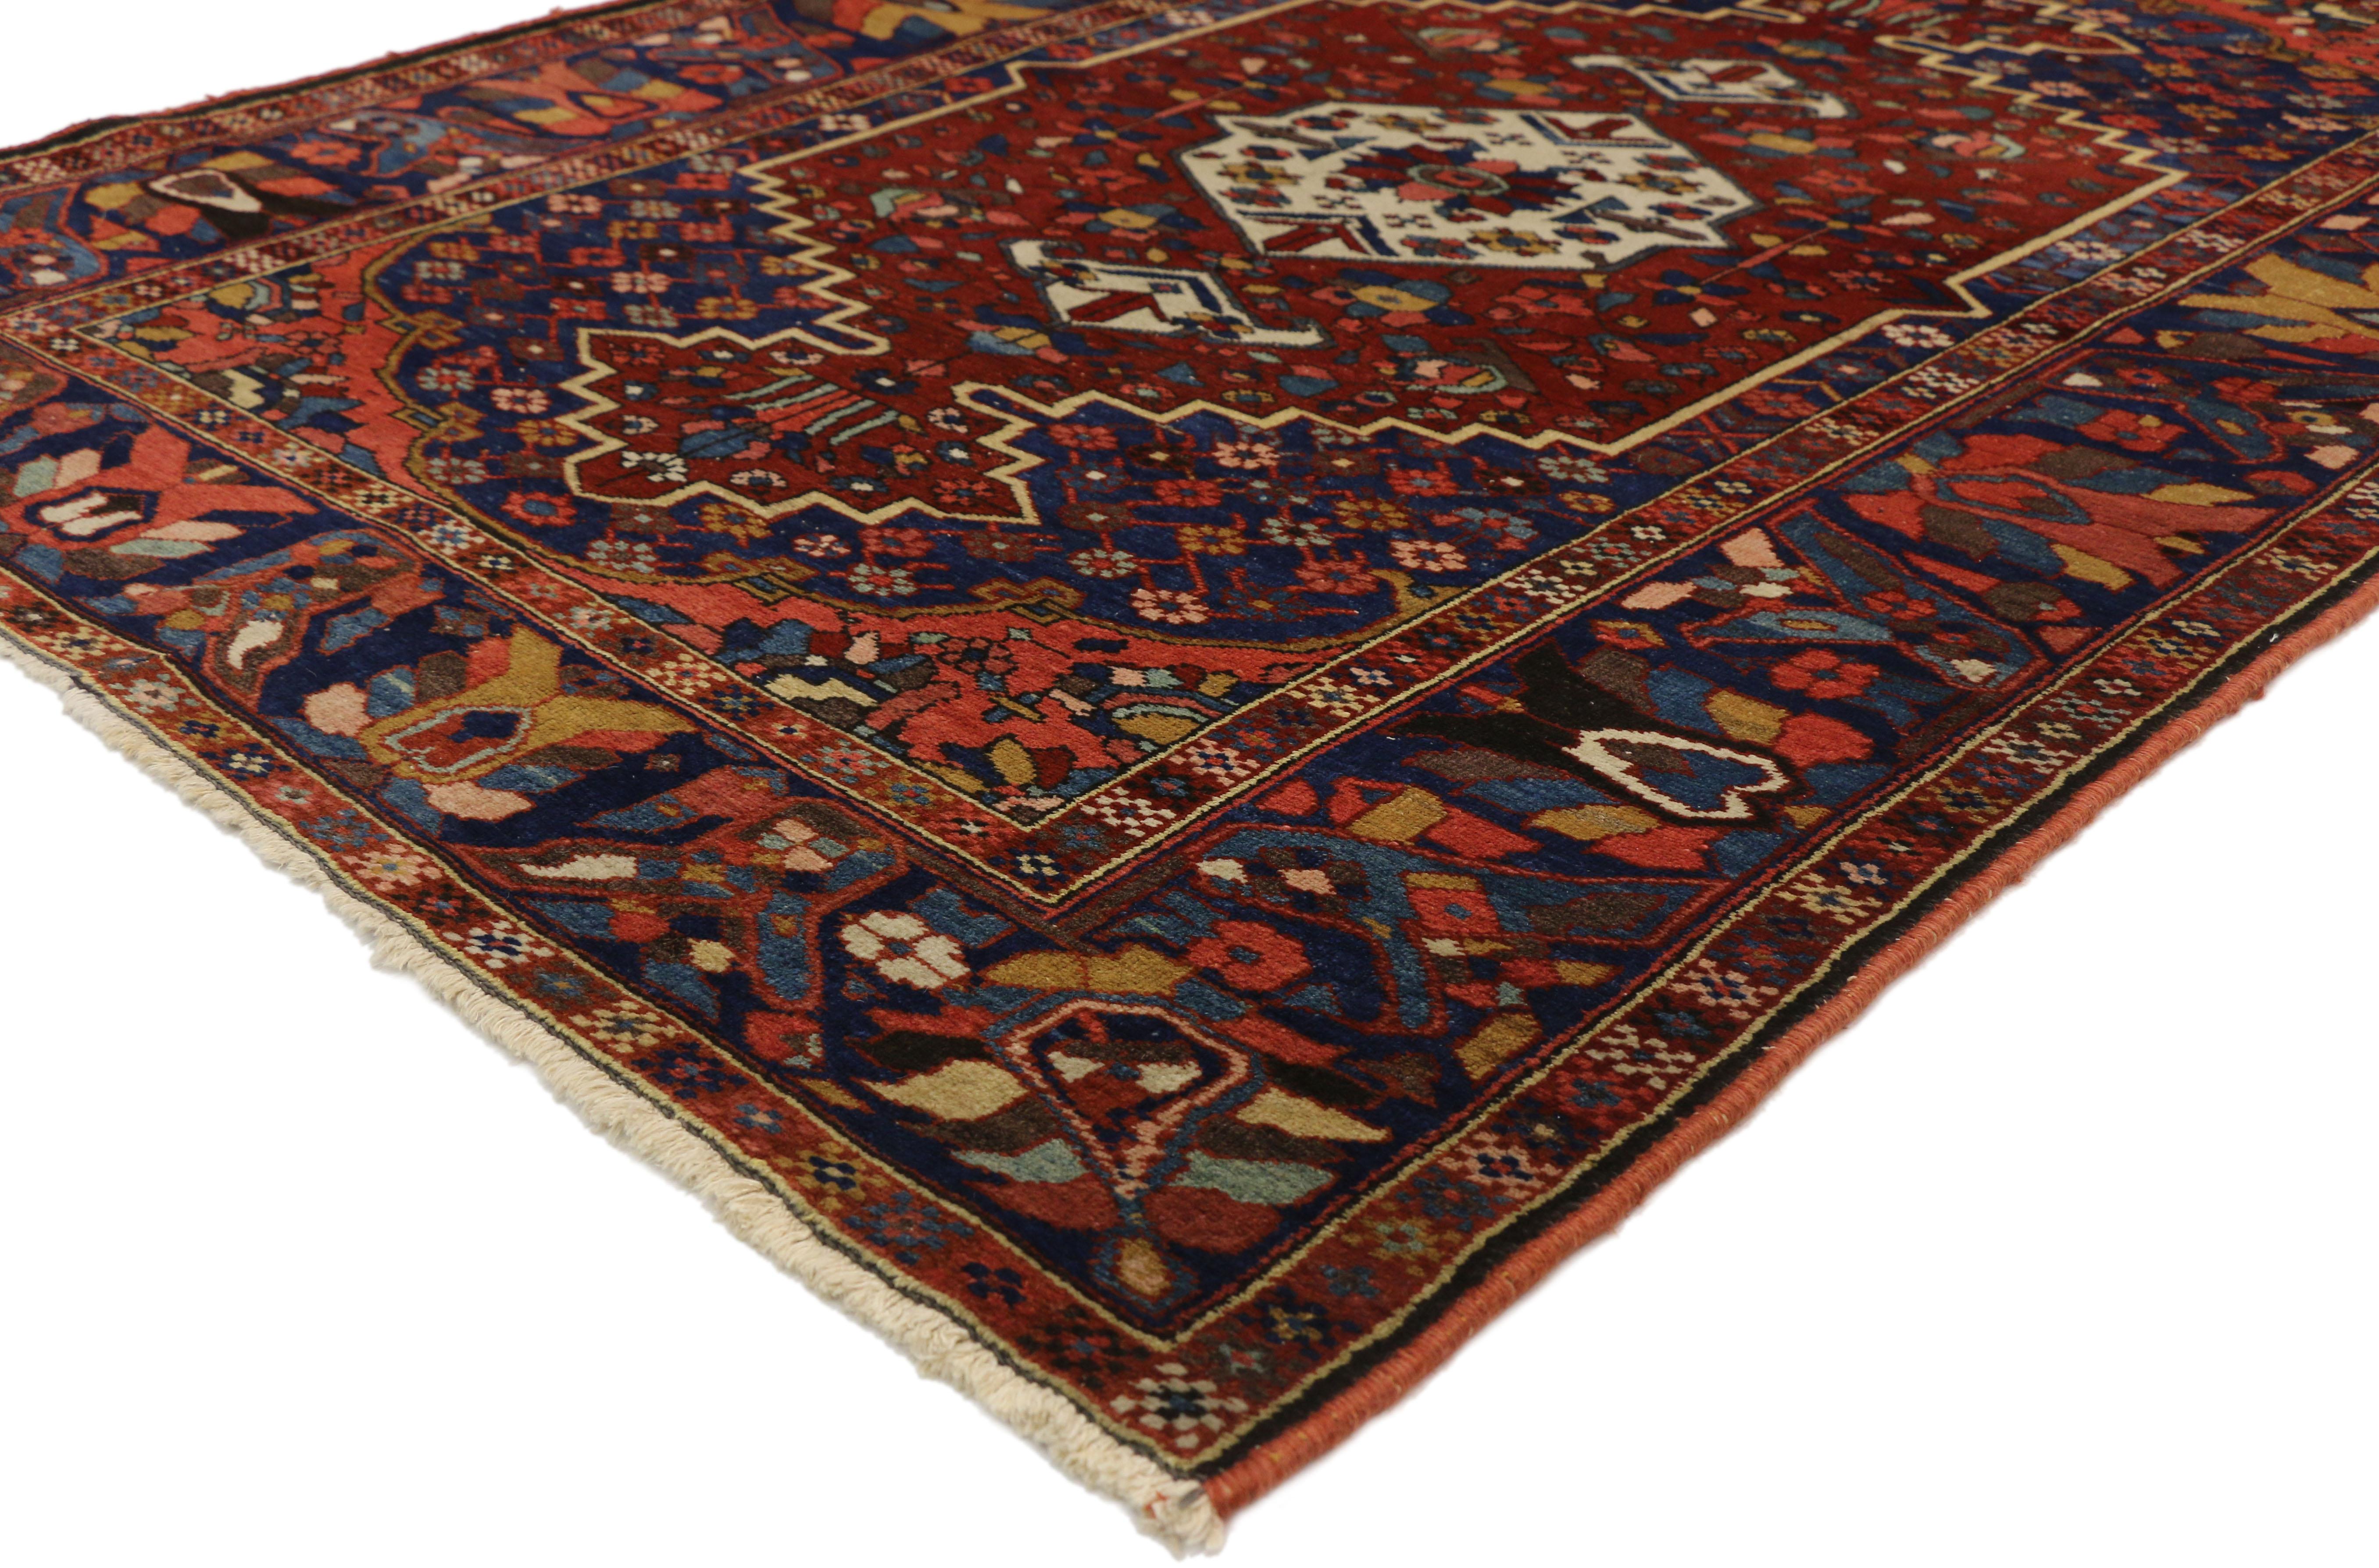 Featuring highly desirable colors and a traditional modern style, this antique Bakhtiari Persian rug embodies a harmonious energy captivating attention with its many layers and impeccable hand-knotted wool. Vibrant geometric florals and the oxblood